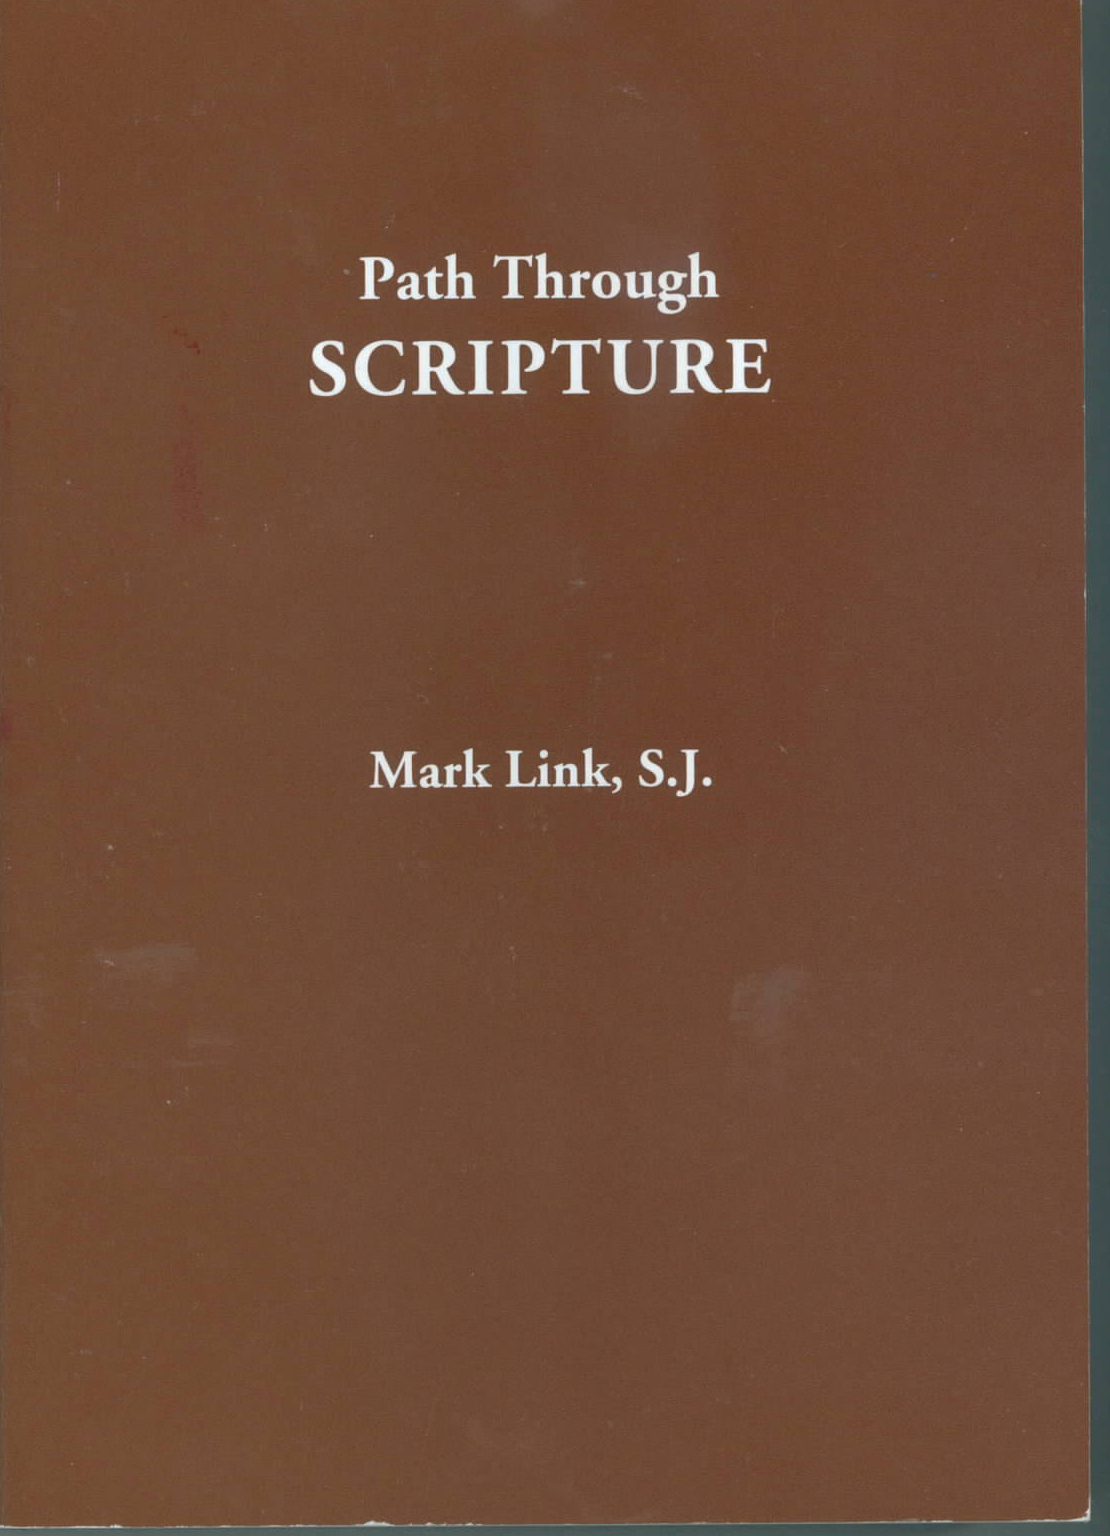 Path Through SCRIPTURE by Mark Link, S.J. 347-9780782916737